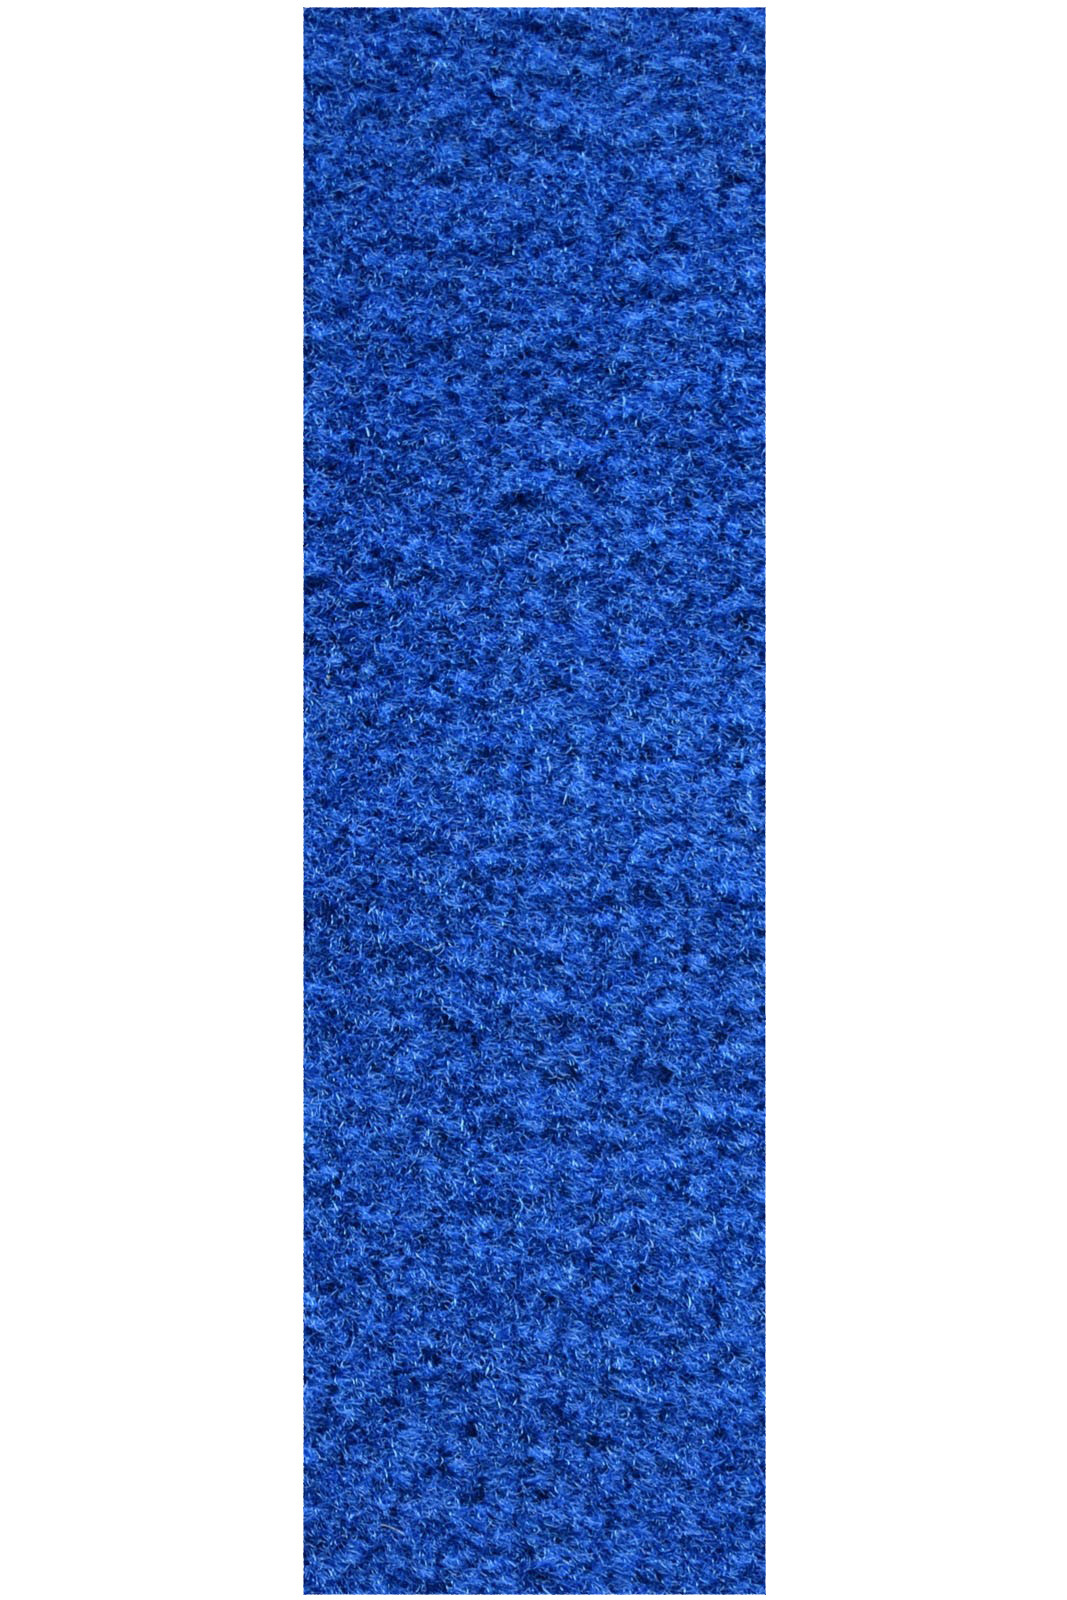 Commercial Indoor/Outdoor Blue Custom Size Runner 4' x 48' - Area Rug with Rubber Marine Backing for Patio, Porch, Deck, Boat, Basement or Garage with Premium Bound Polyester Edges - image 1 of 1